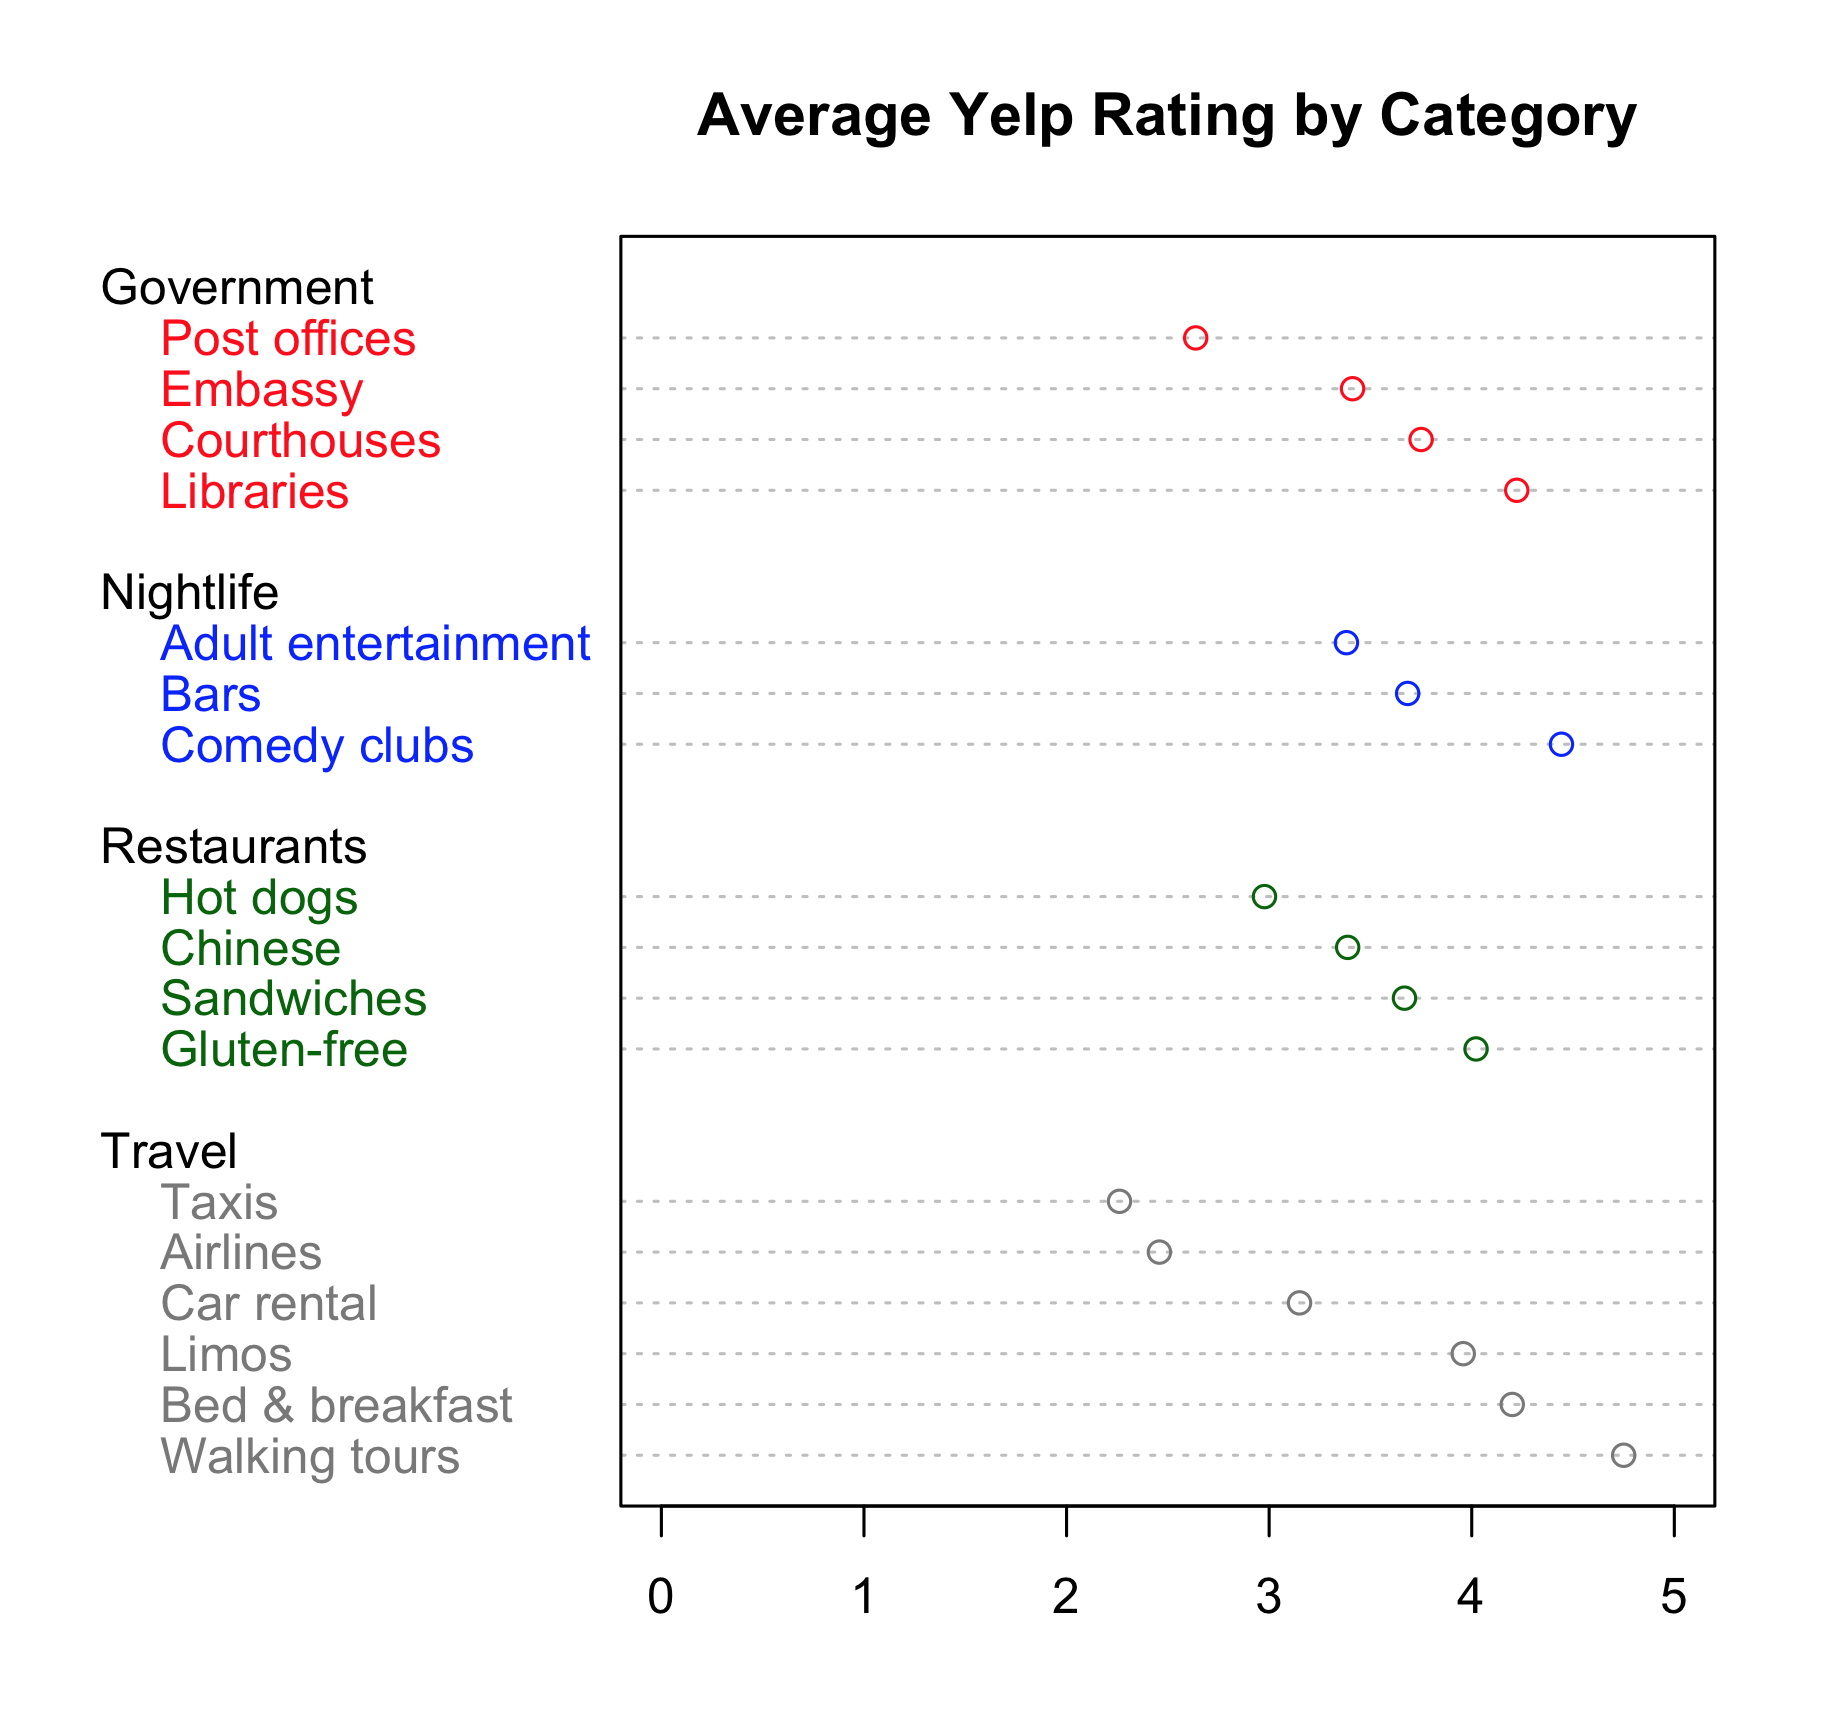 Average Yelp Rating of Various Business Categories